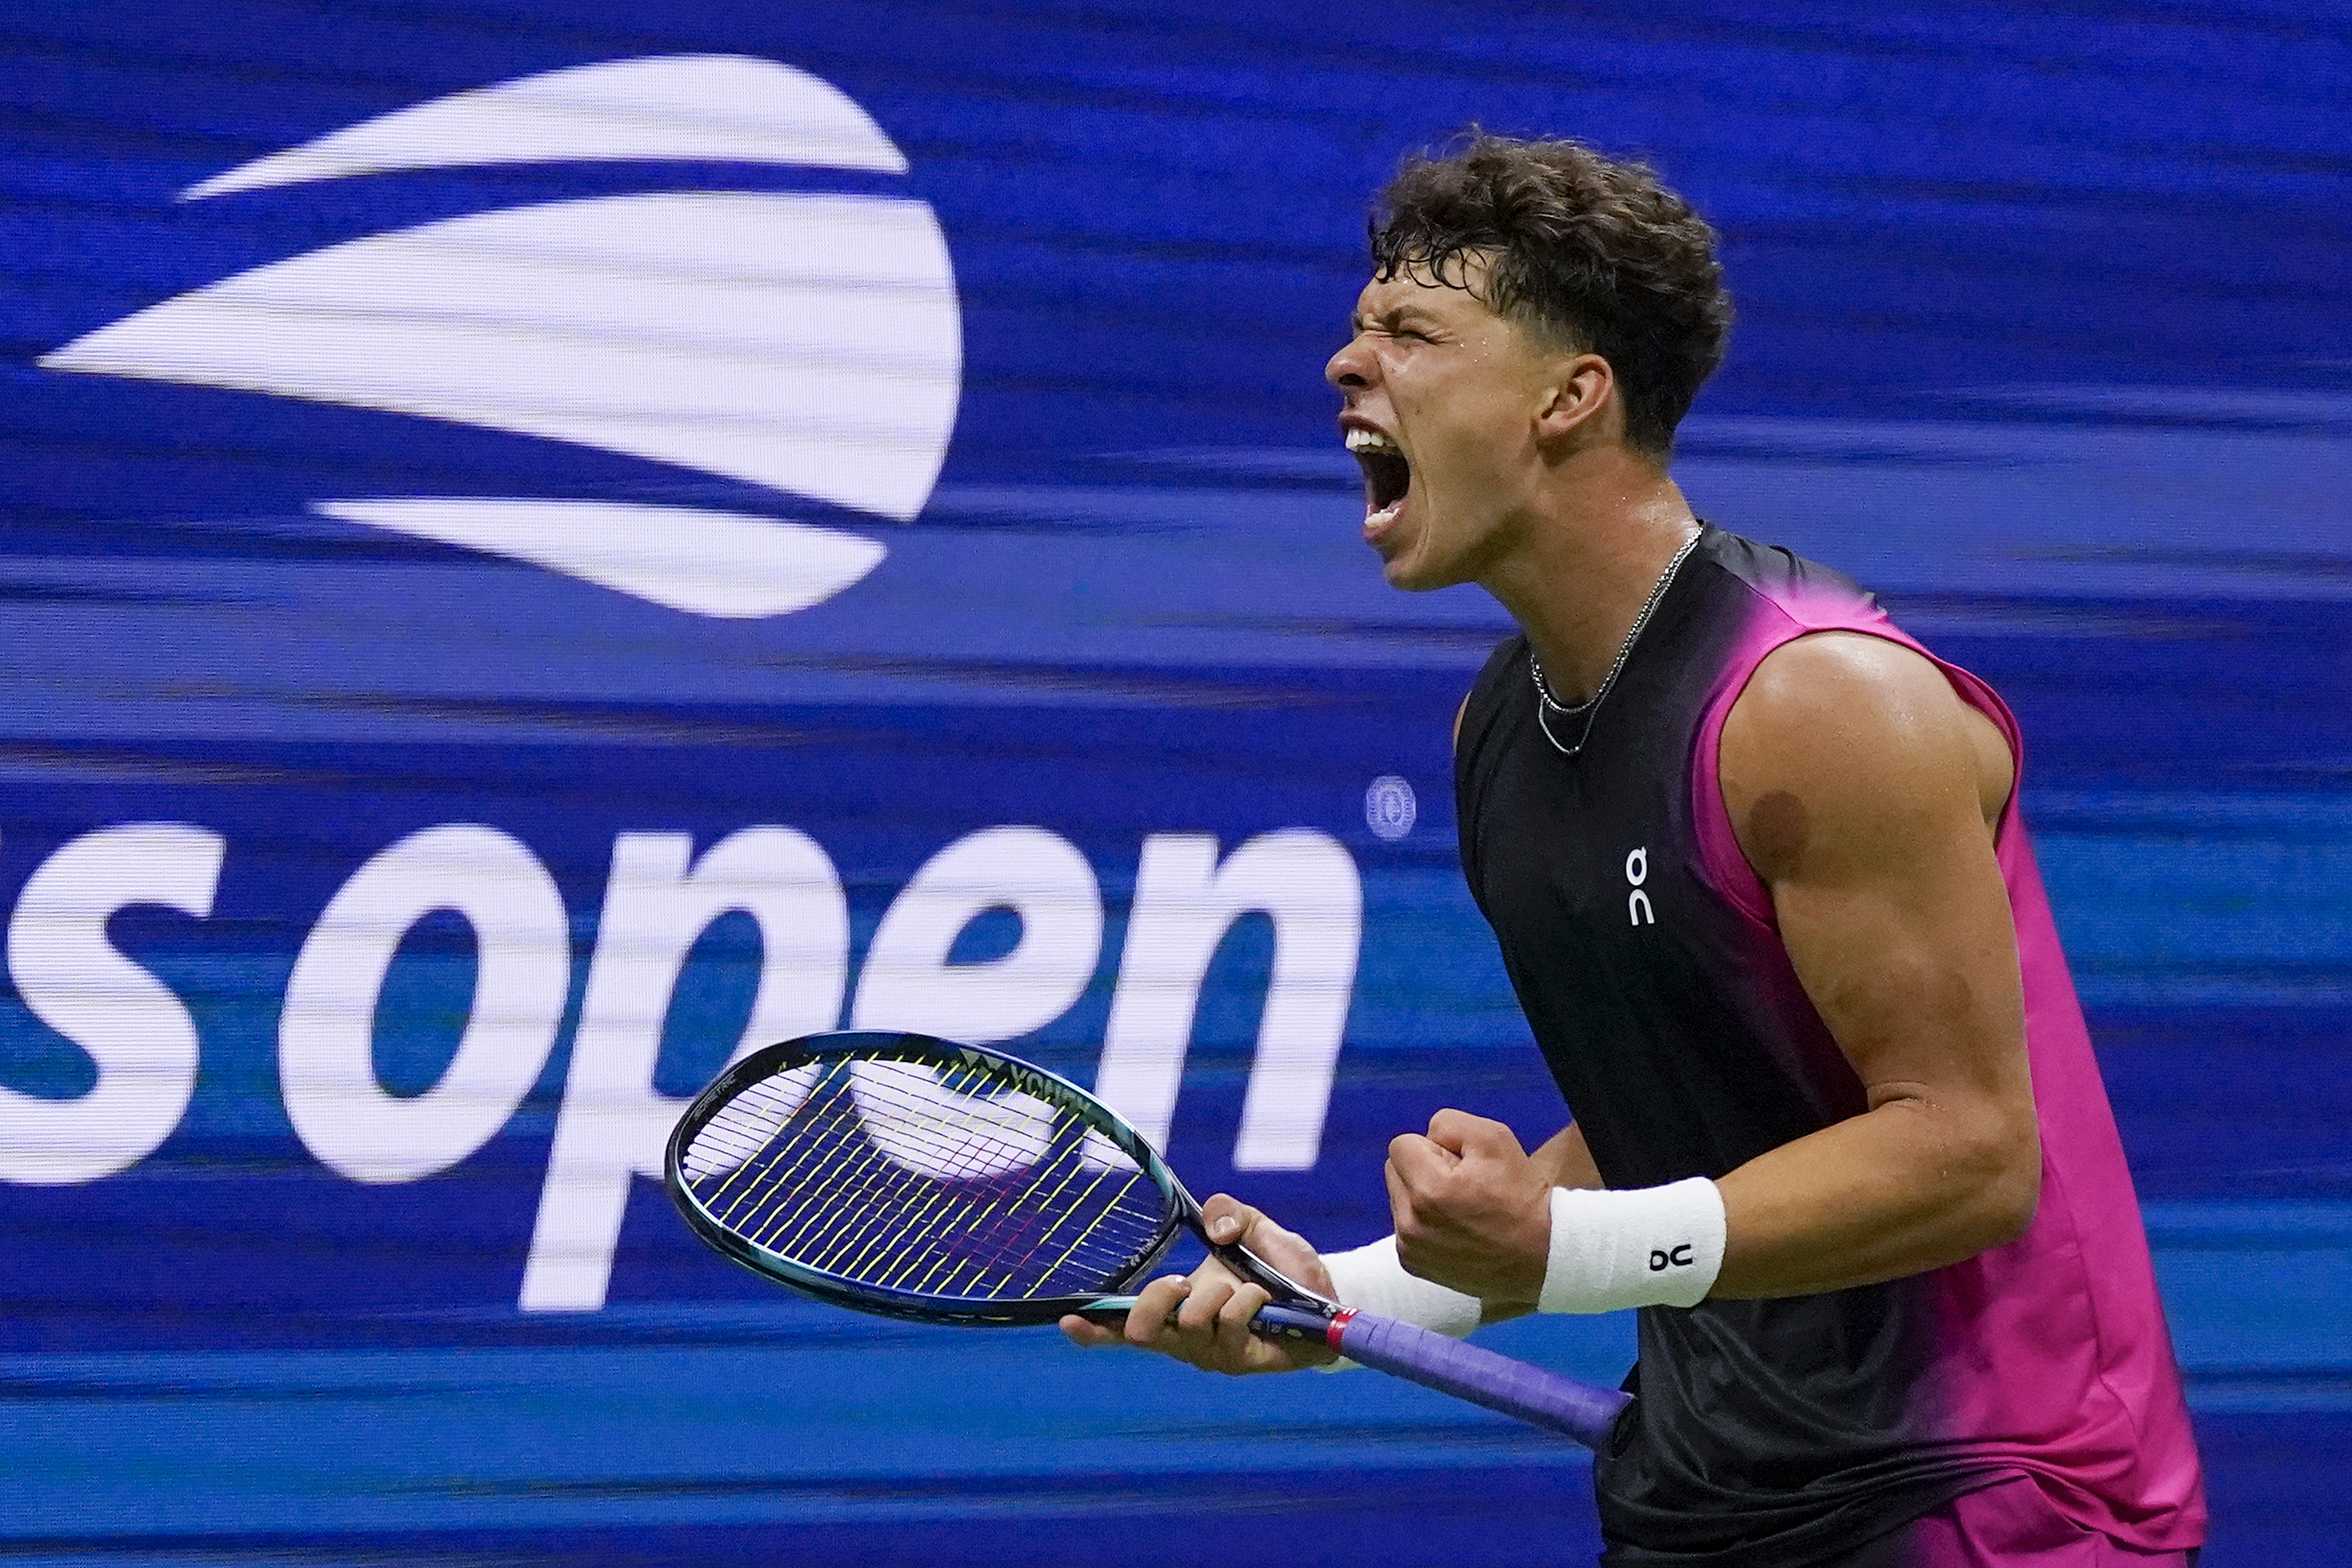 Ben Shelton tops Frances Tiafoe at the US Open for his first Slam semifinal